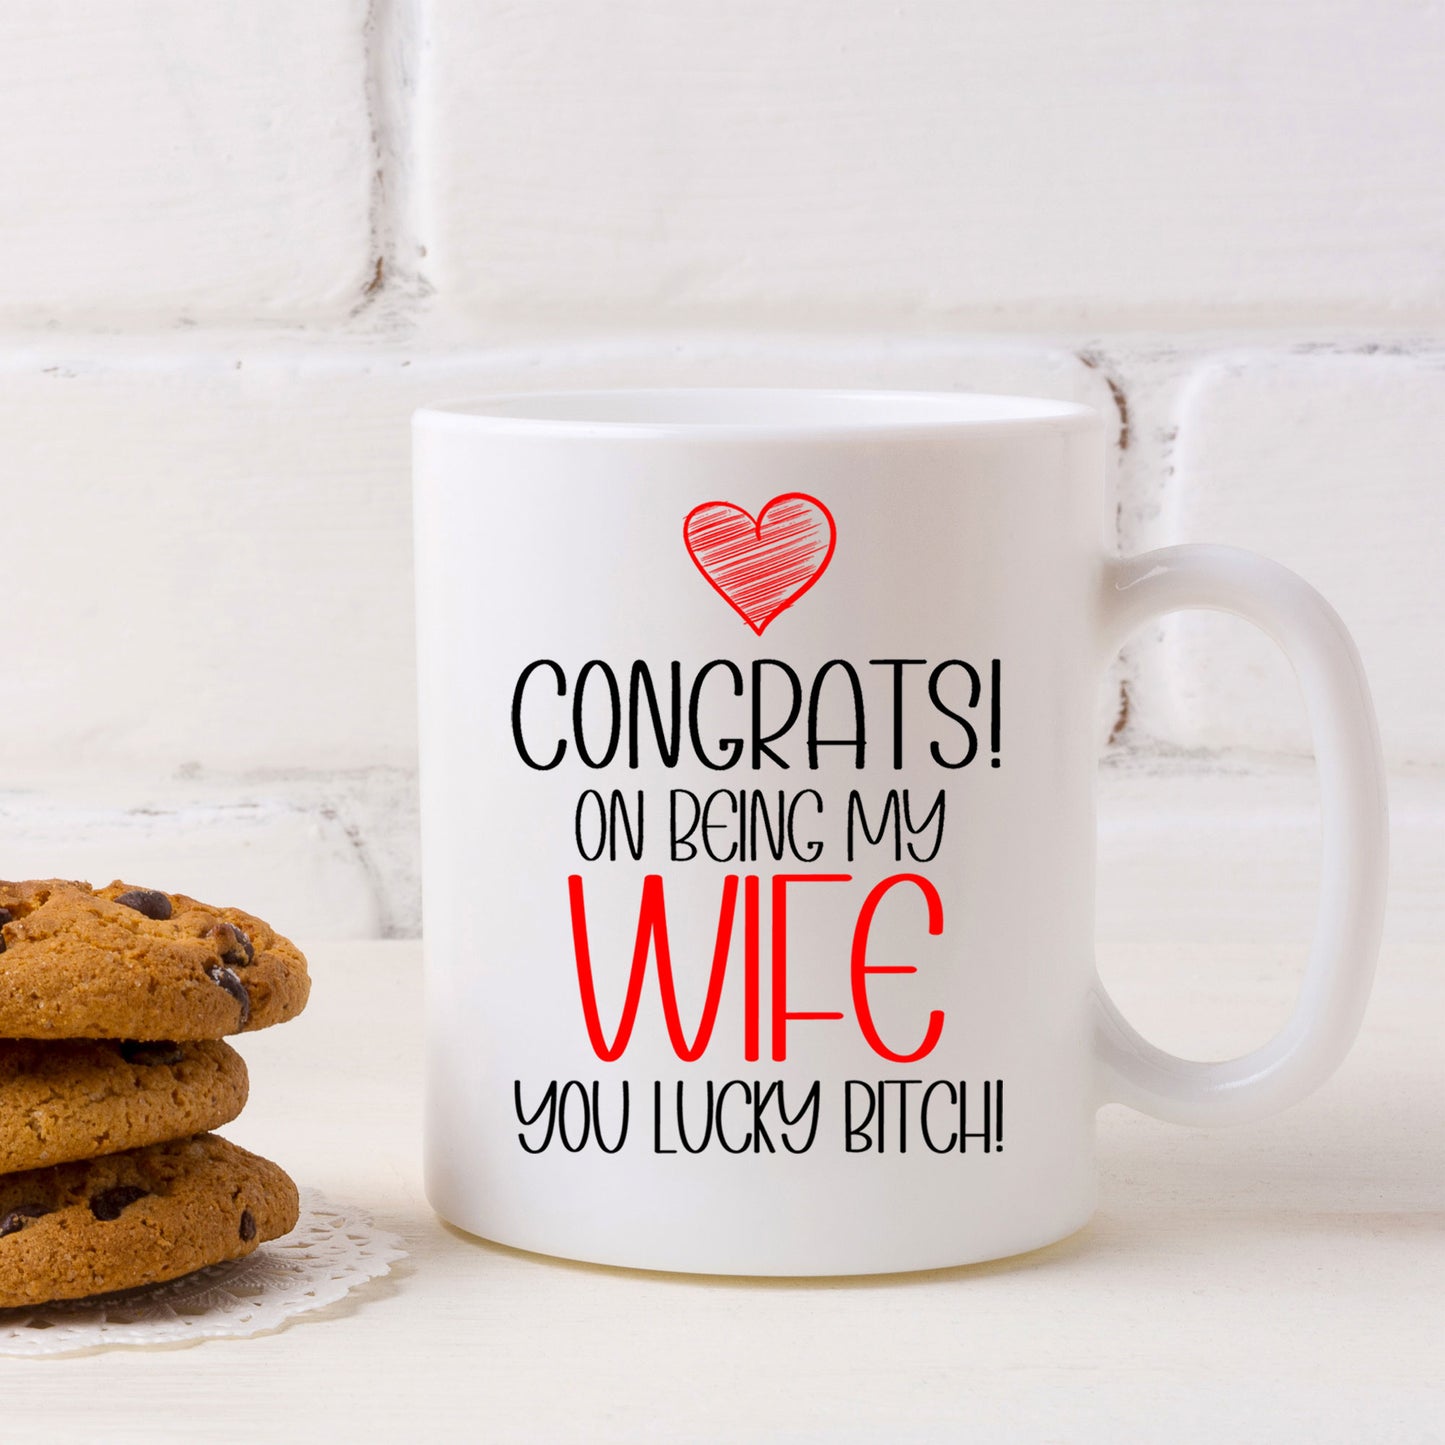 Congrats On Being My Wife Mug and/or Coaster Gift  - Always Looking Good - Lucky Bitch Mug On Its Own  